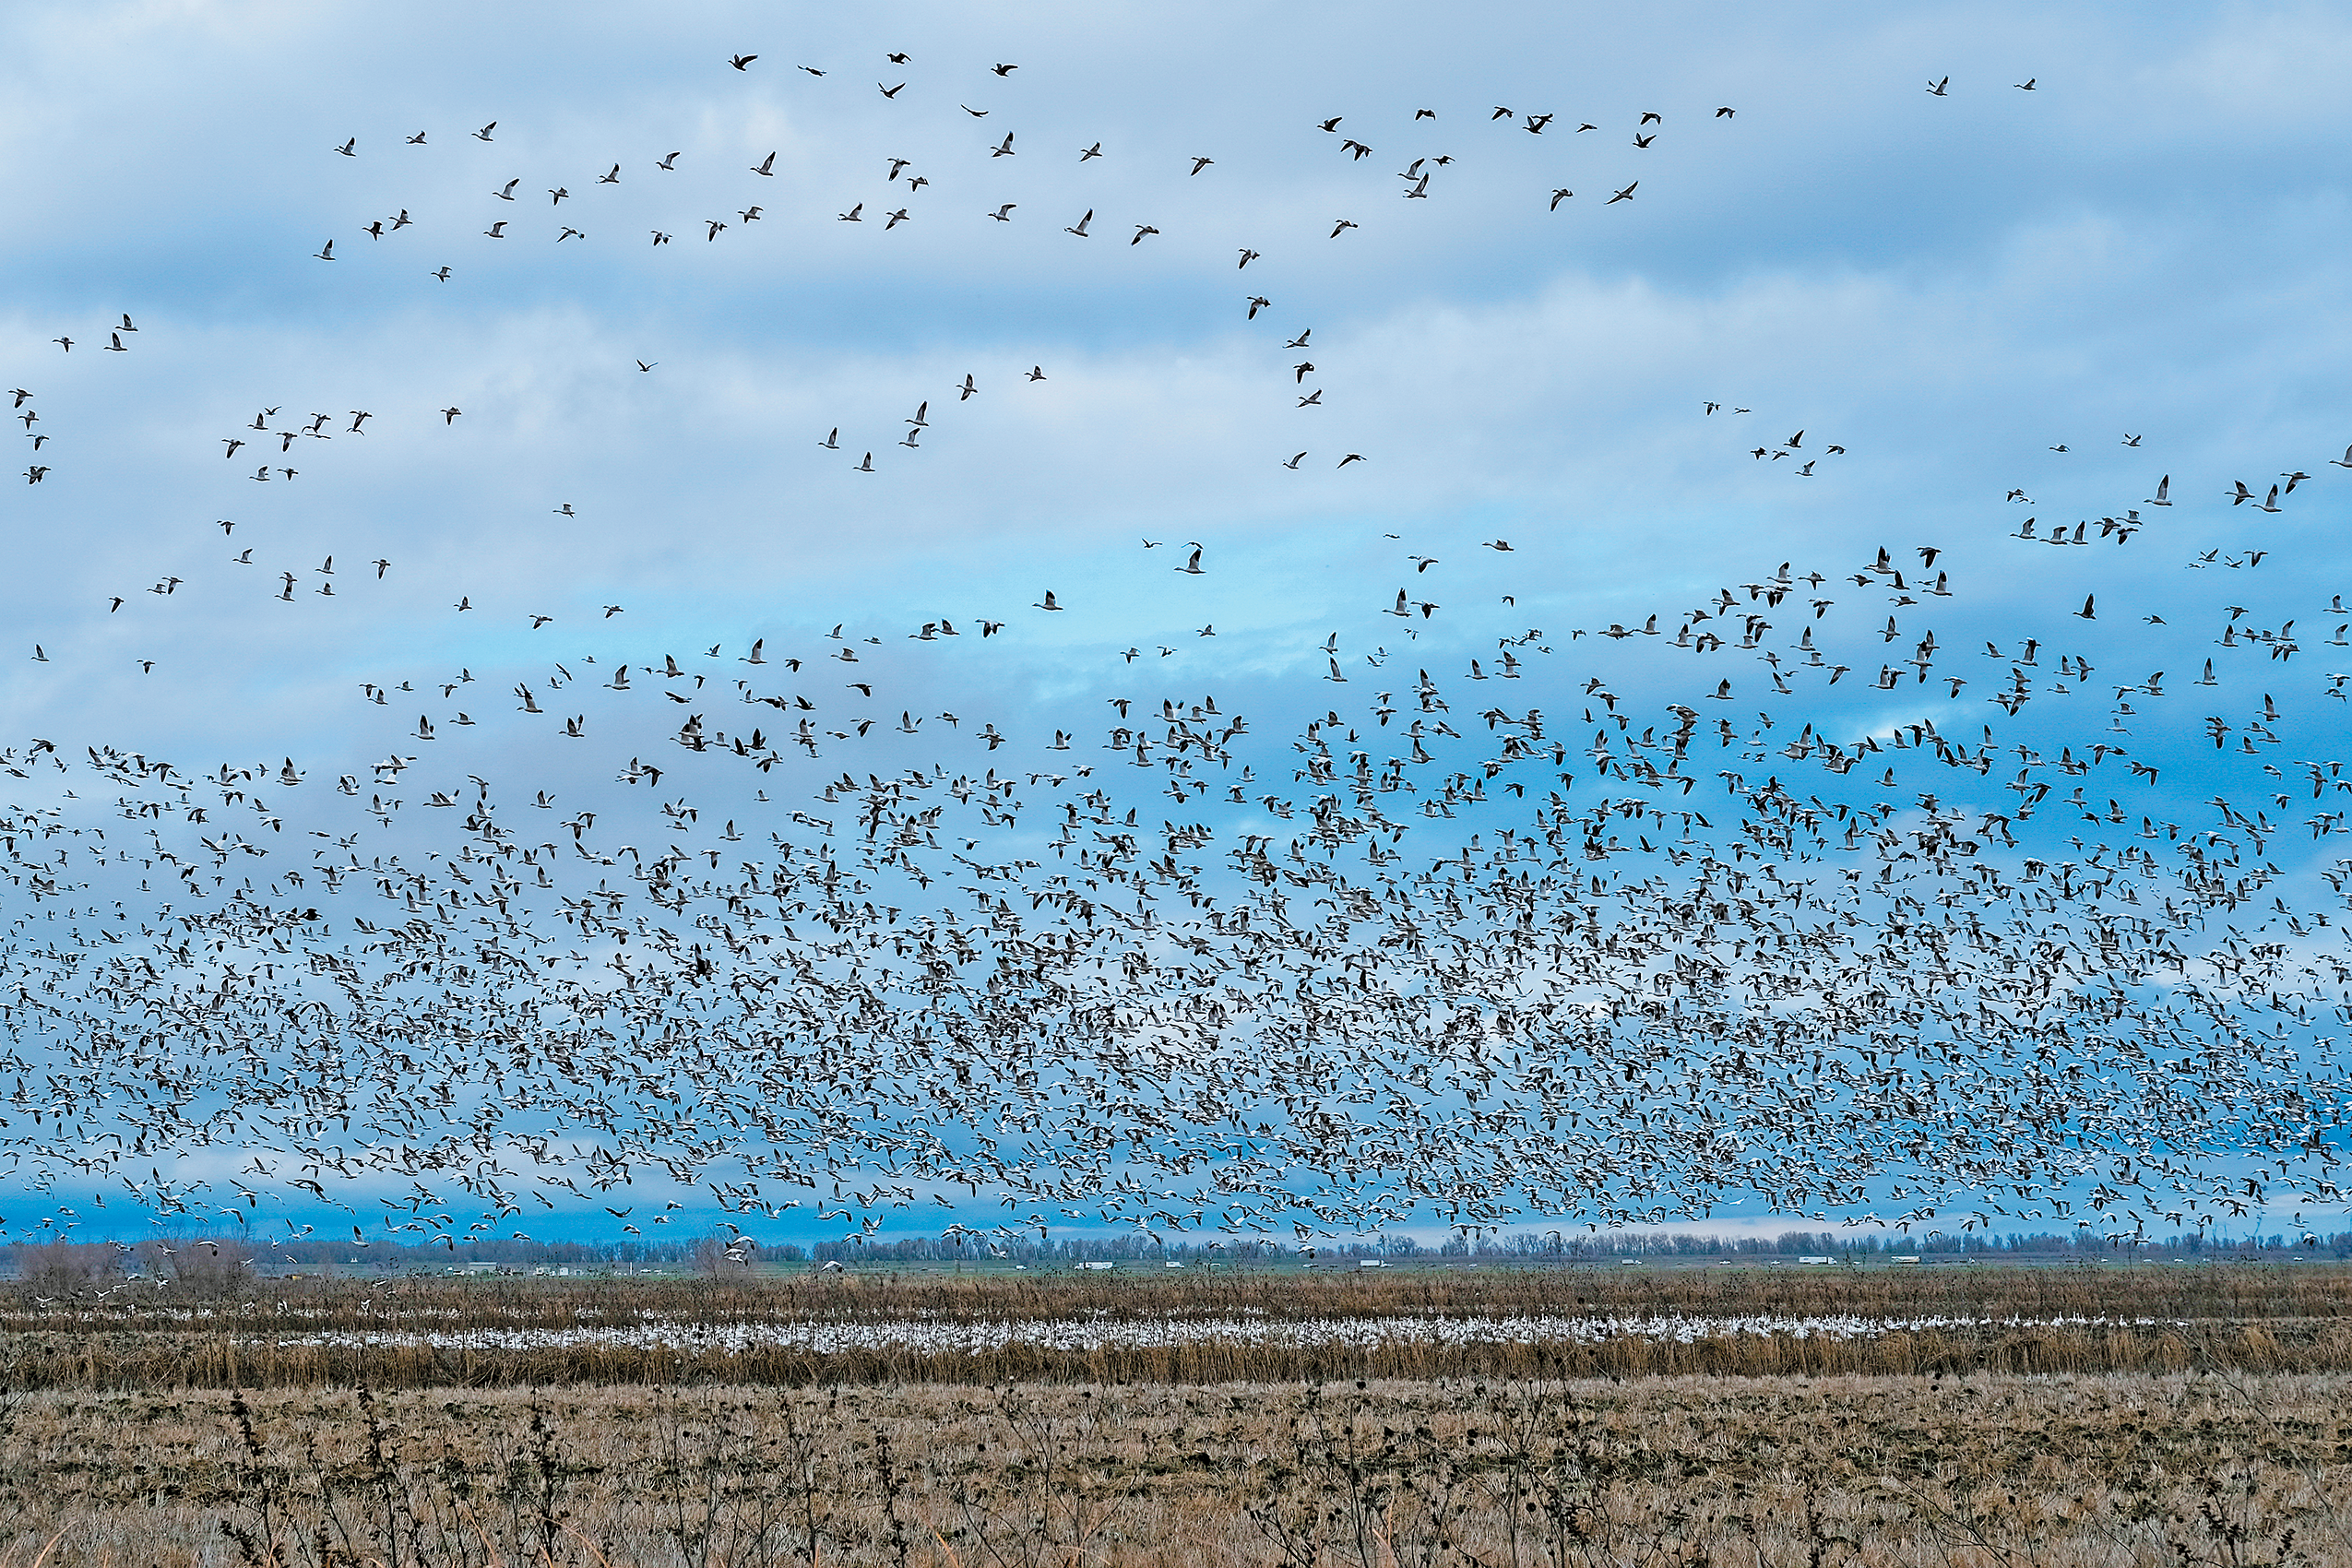 Waterfowl flock again to valley rice fields